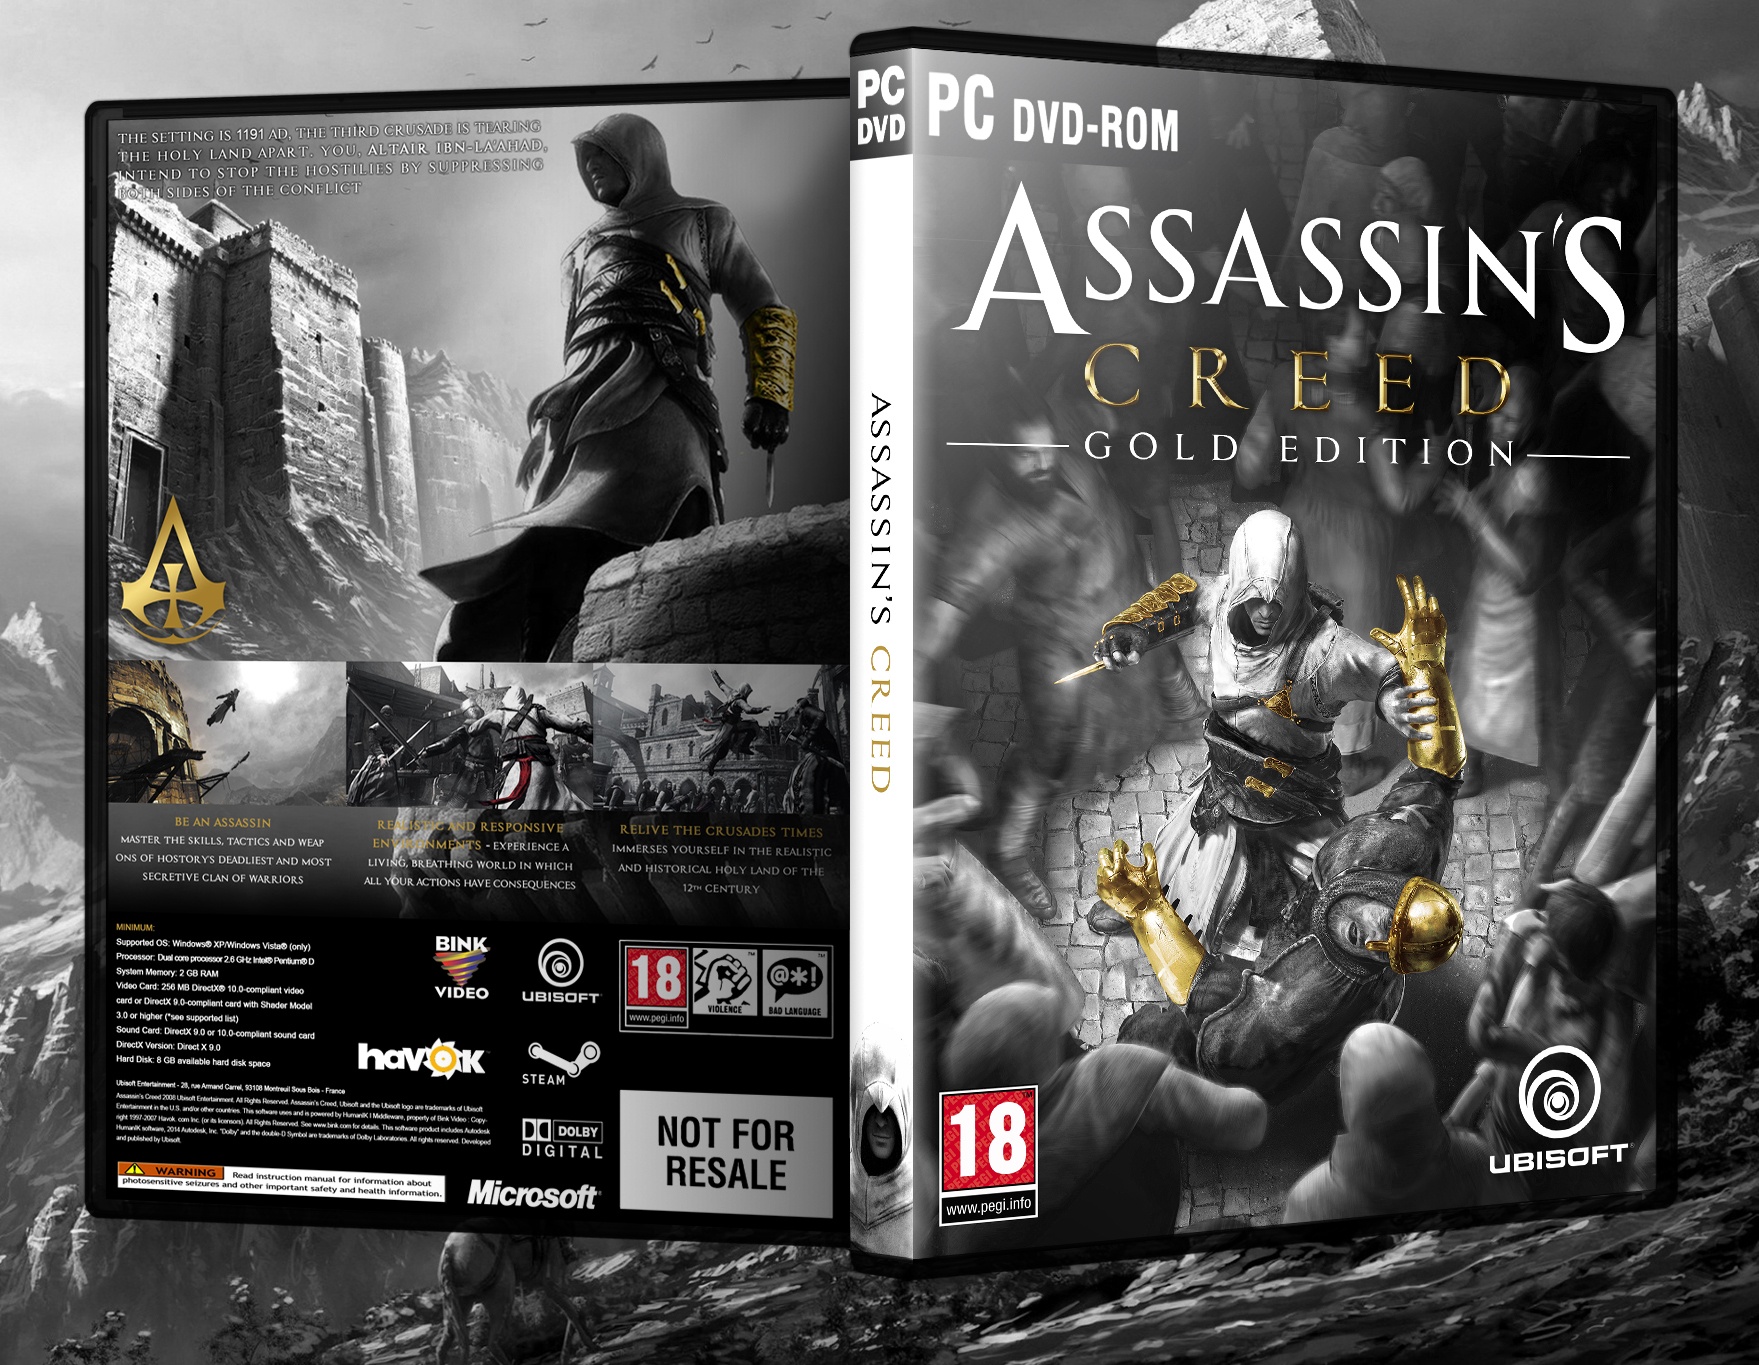 Assassin's Creed Gold Edition box cover